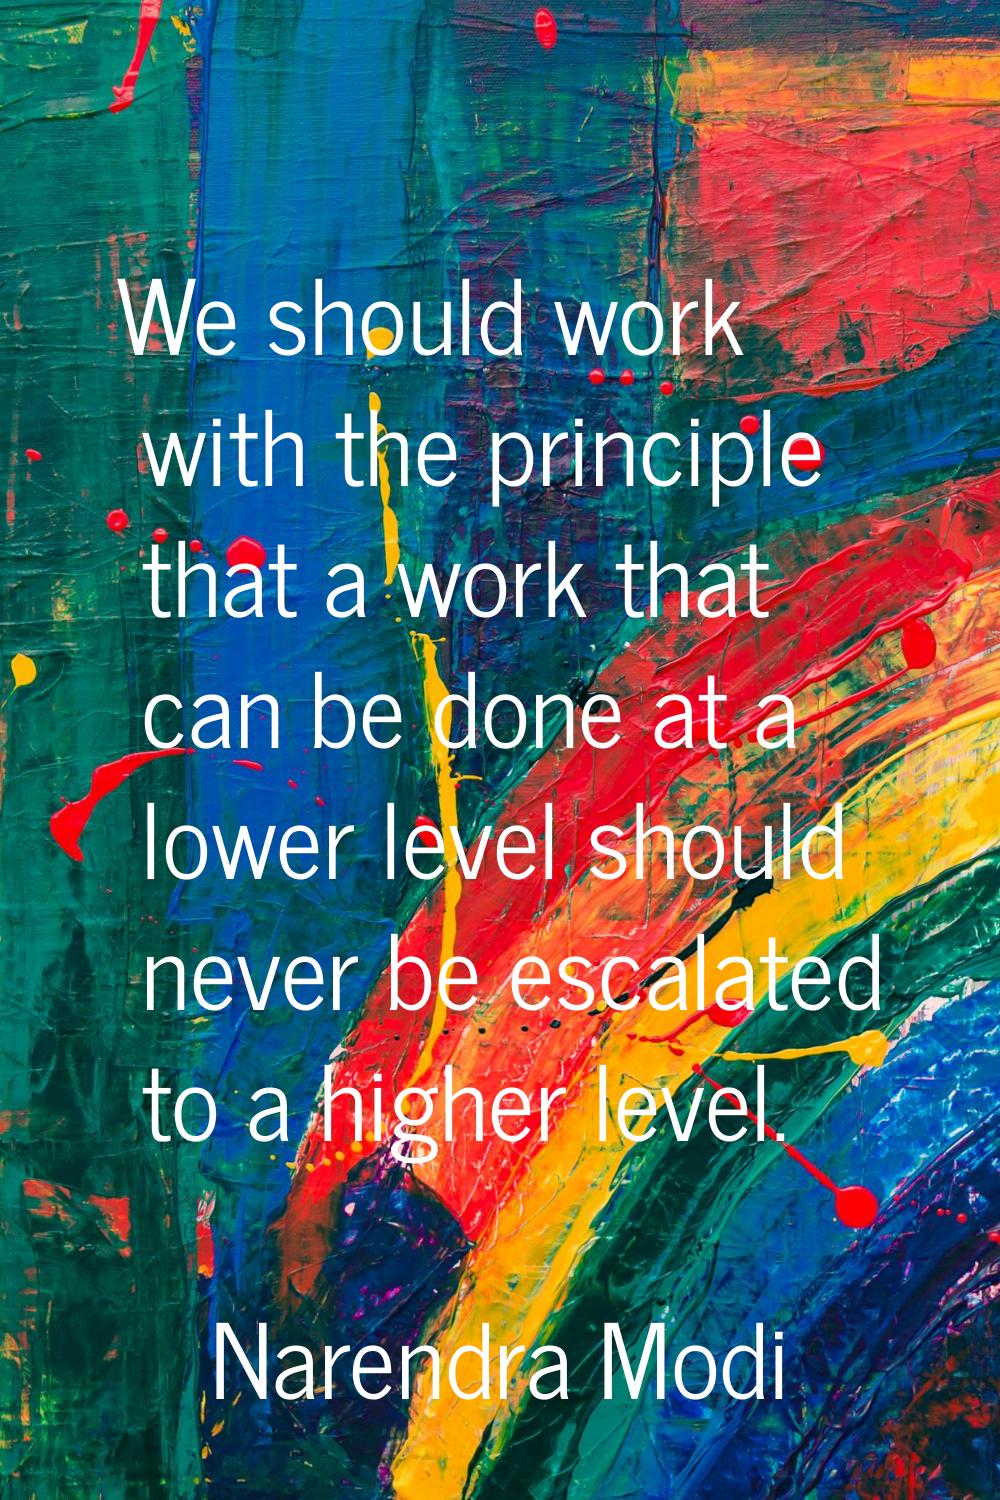 We should work with the principle that a work that can be done at a lower level should never be esc